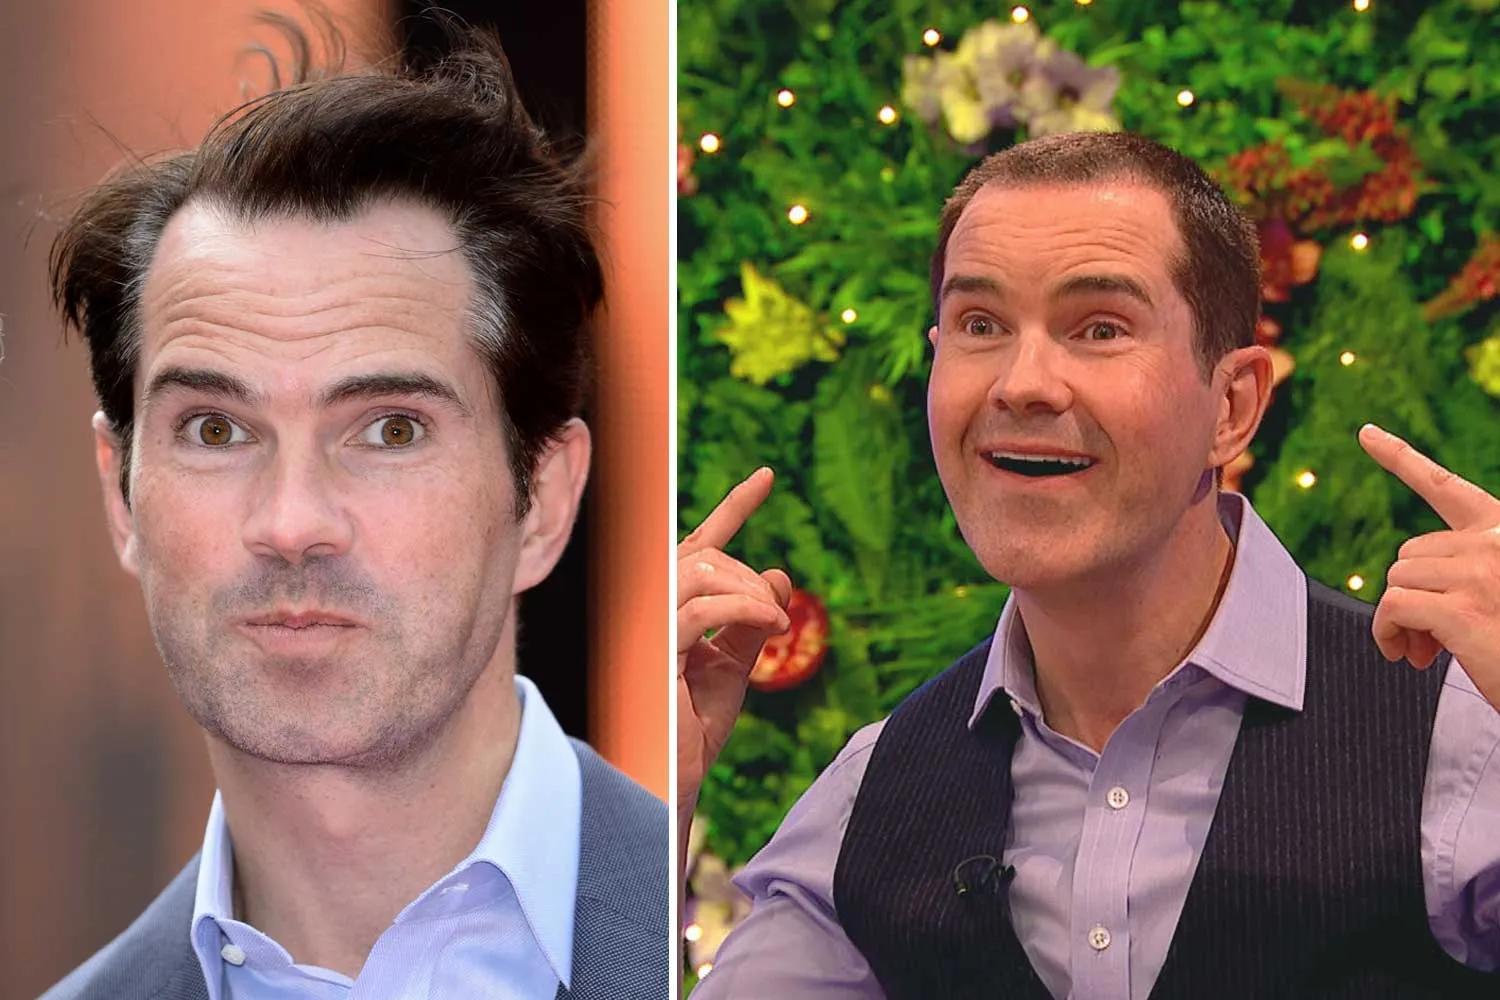 Jimmy Carr Before and After: Did Jimmy Carr Get Plastic Surgery?